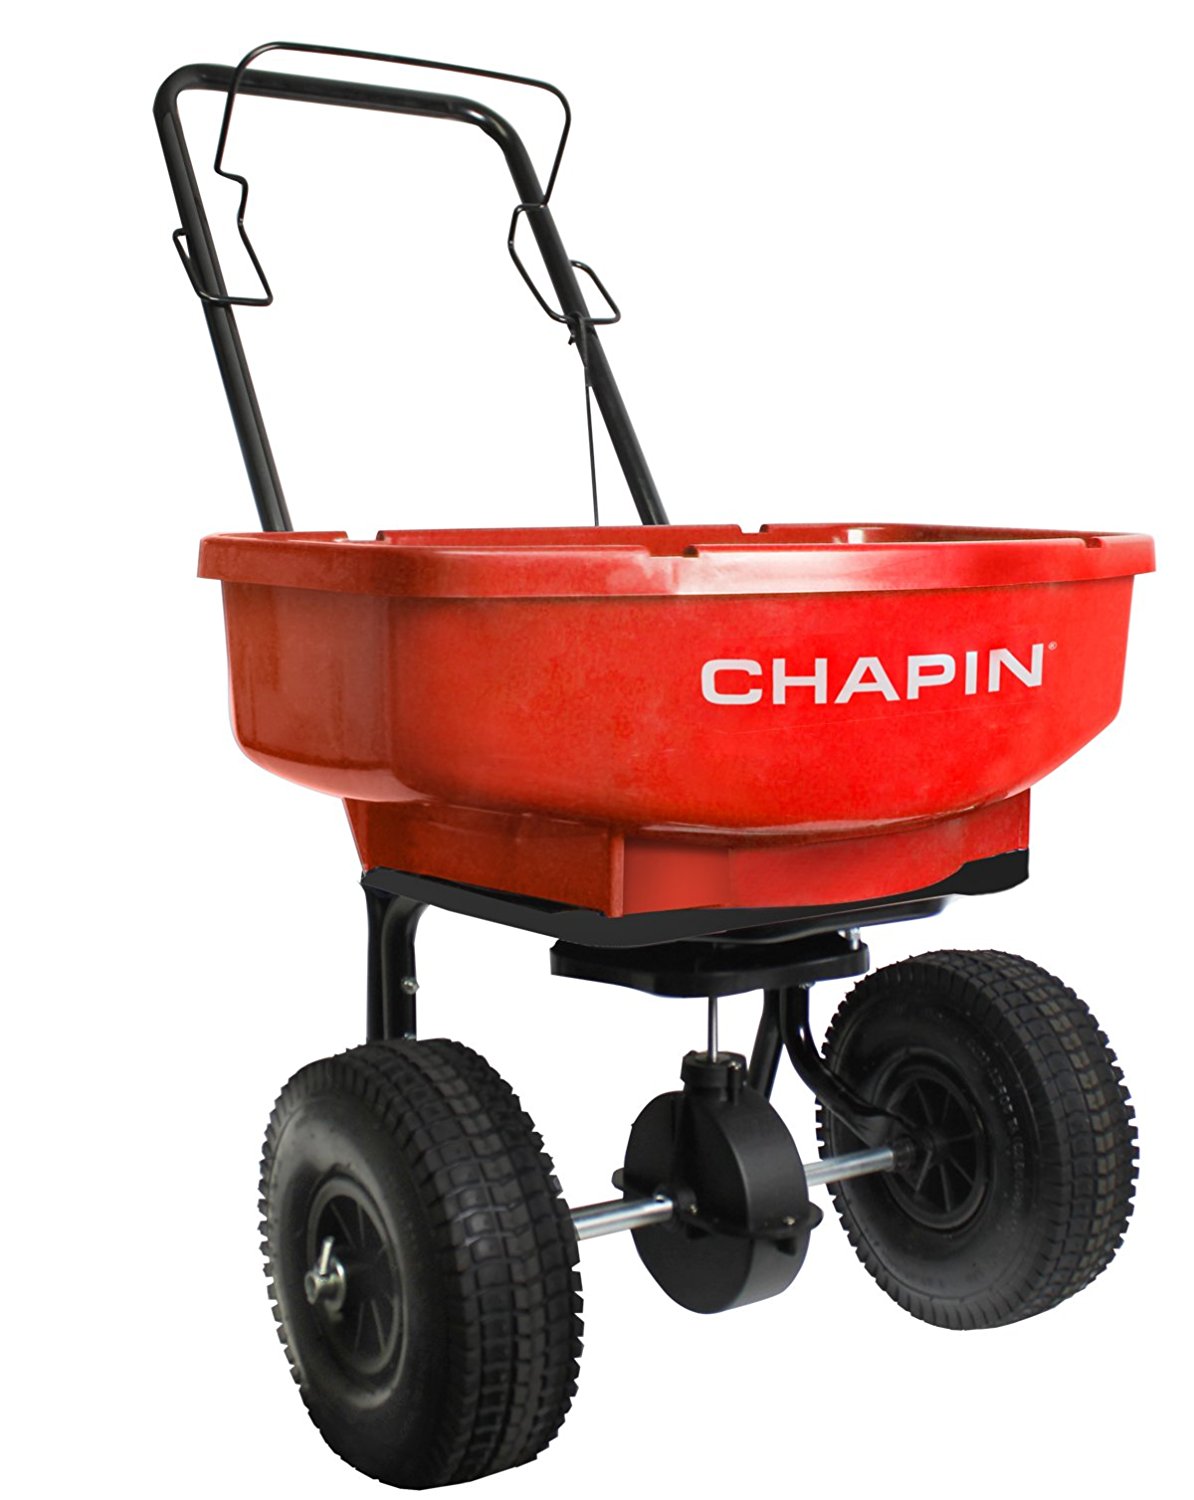 Chapin 81000A Residential Turf Spreader, 10" Pneumatic Tire, 80-Pound Capacity